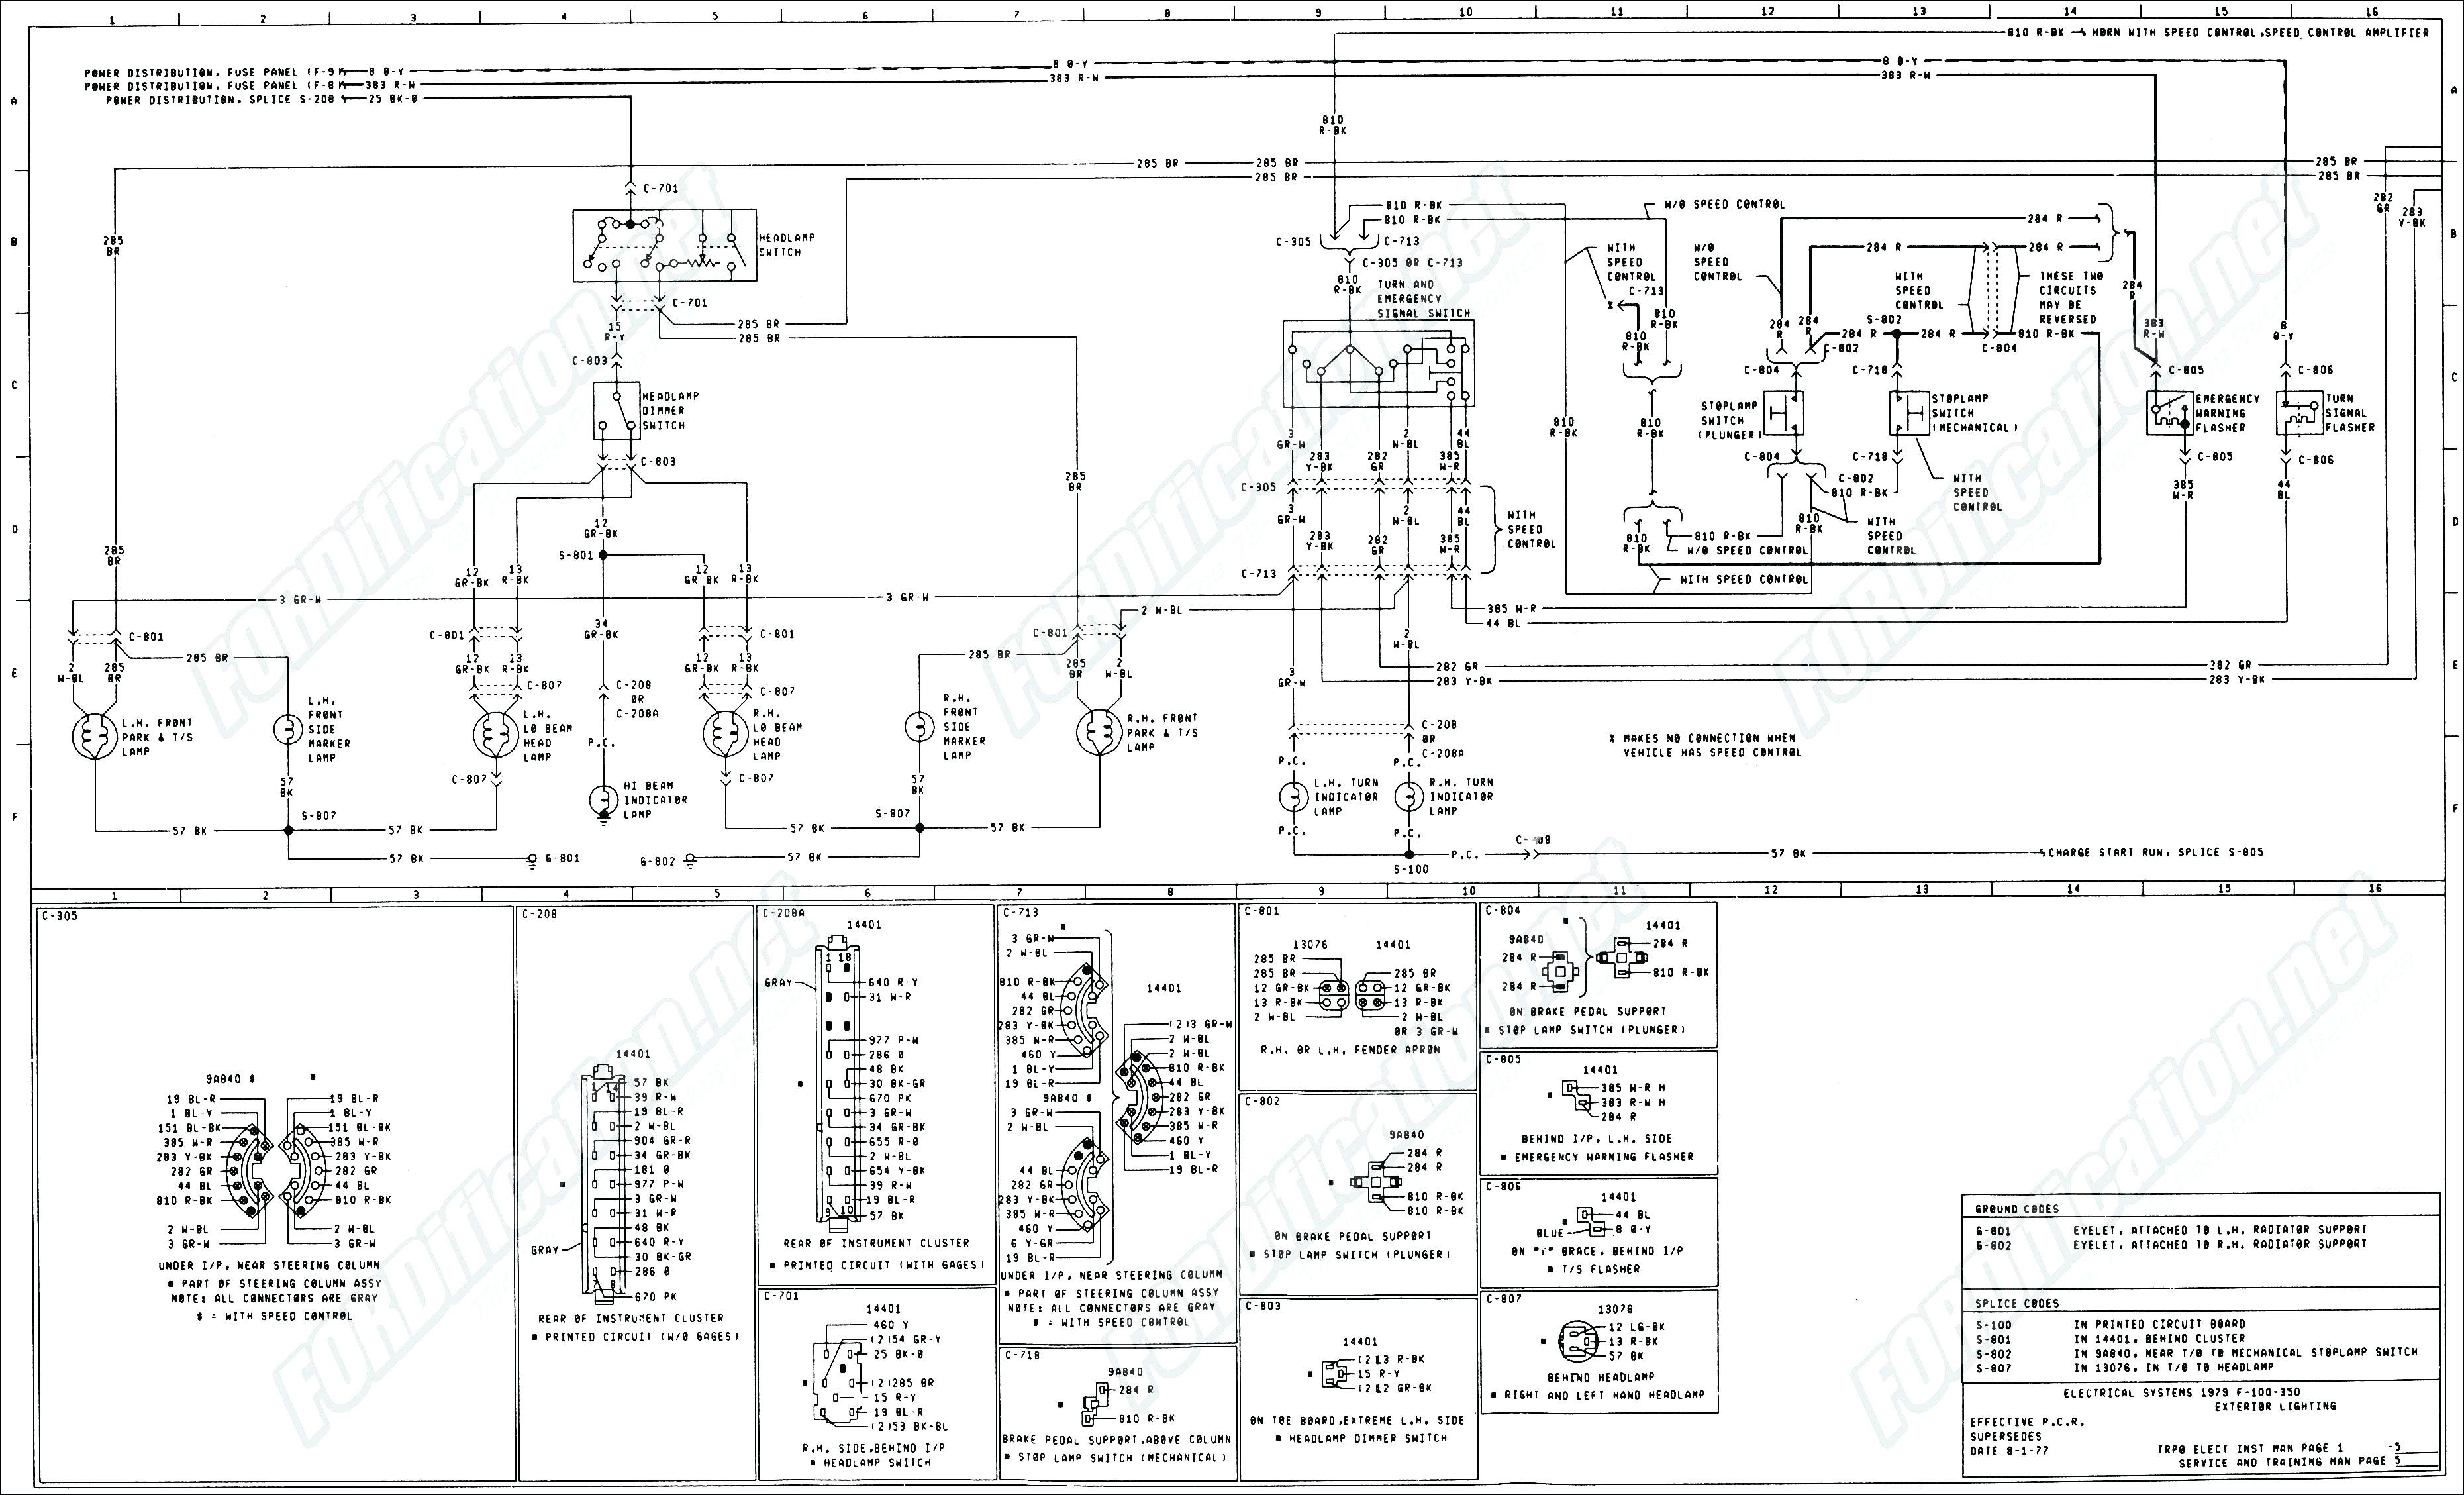 Ford Fusion Engine Diagram ford F350 Fuse Box Diagram Engine Schematics and Wiring Diagrams Of Ford Fusion Engine Diagram